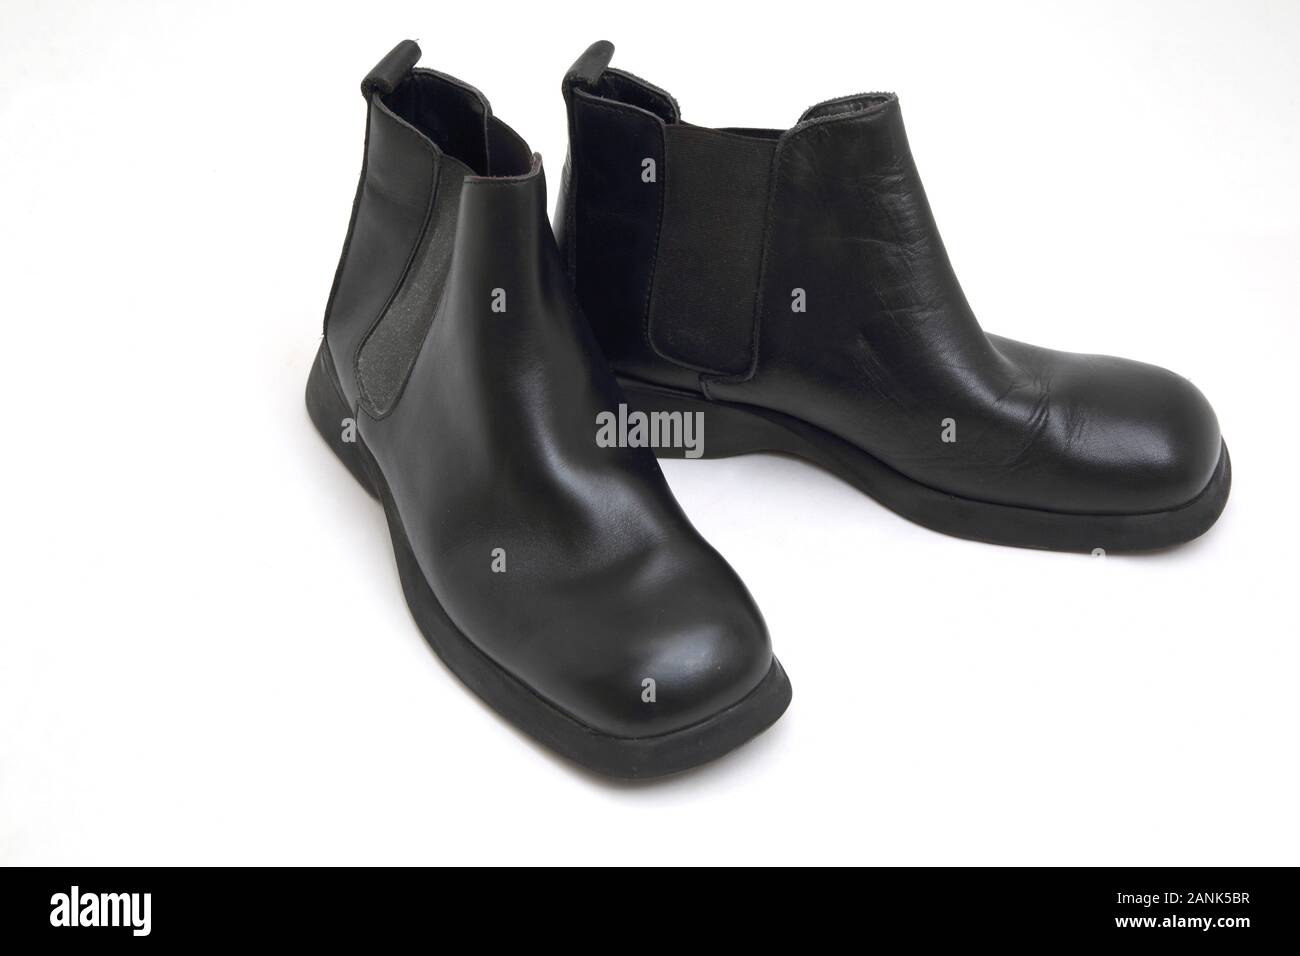 A Pair of Black Leather Chelsea Boots Stock Photo